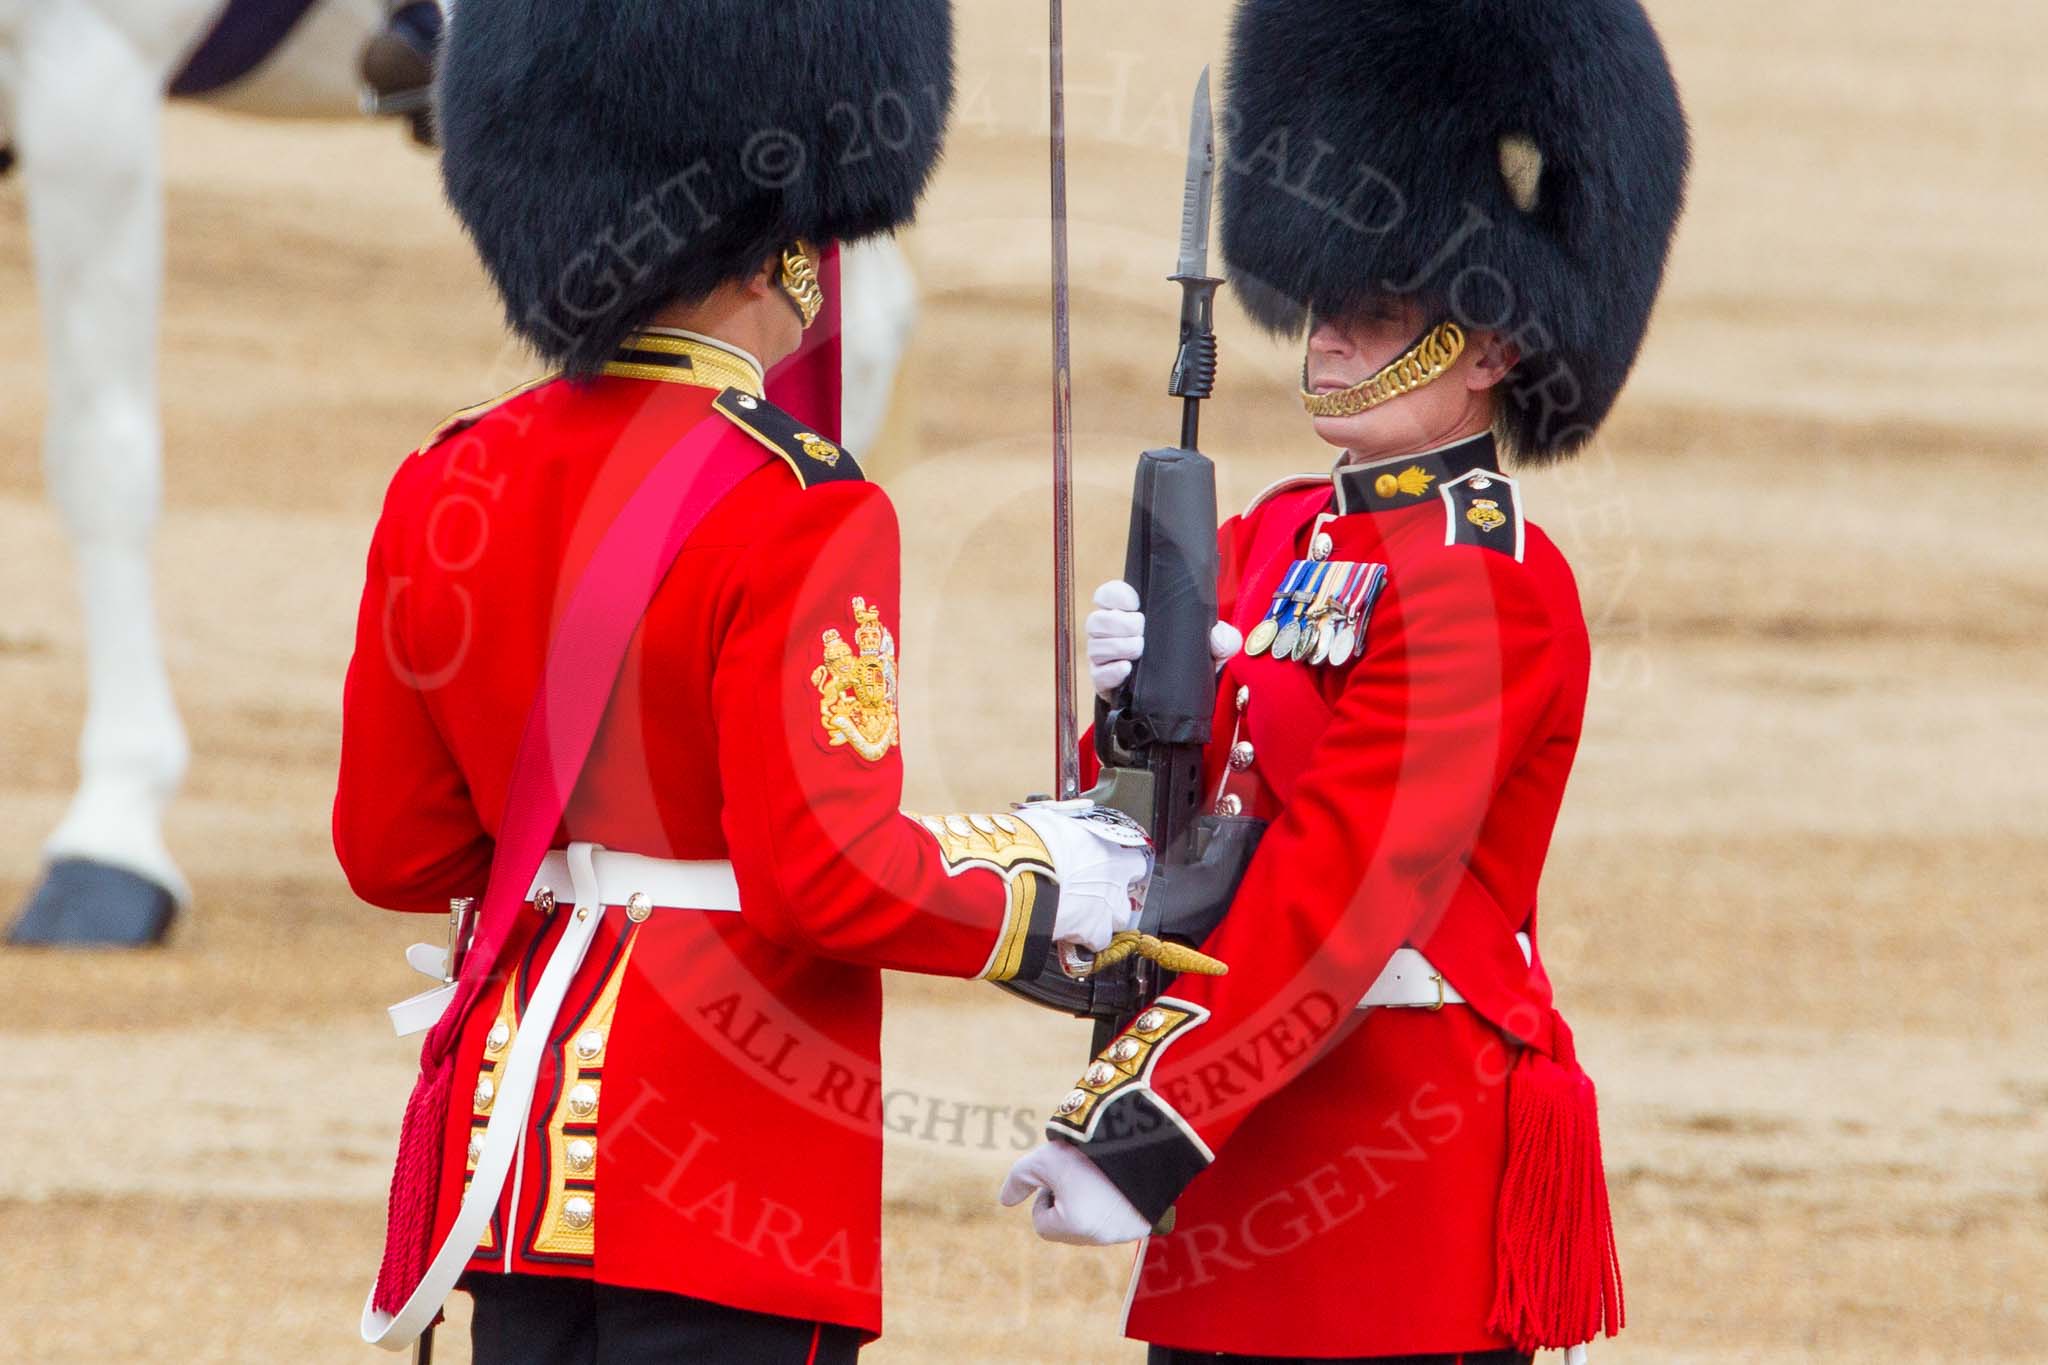 Trooping the Colour 2014.
Horse Guards Parade, Westminster,
London SW1A,

United Kingdom,
on 14 June 2014 at 11:21, image #529